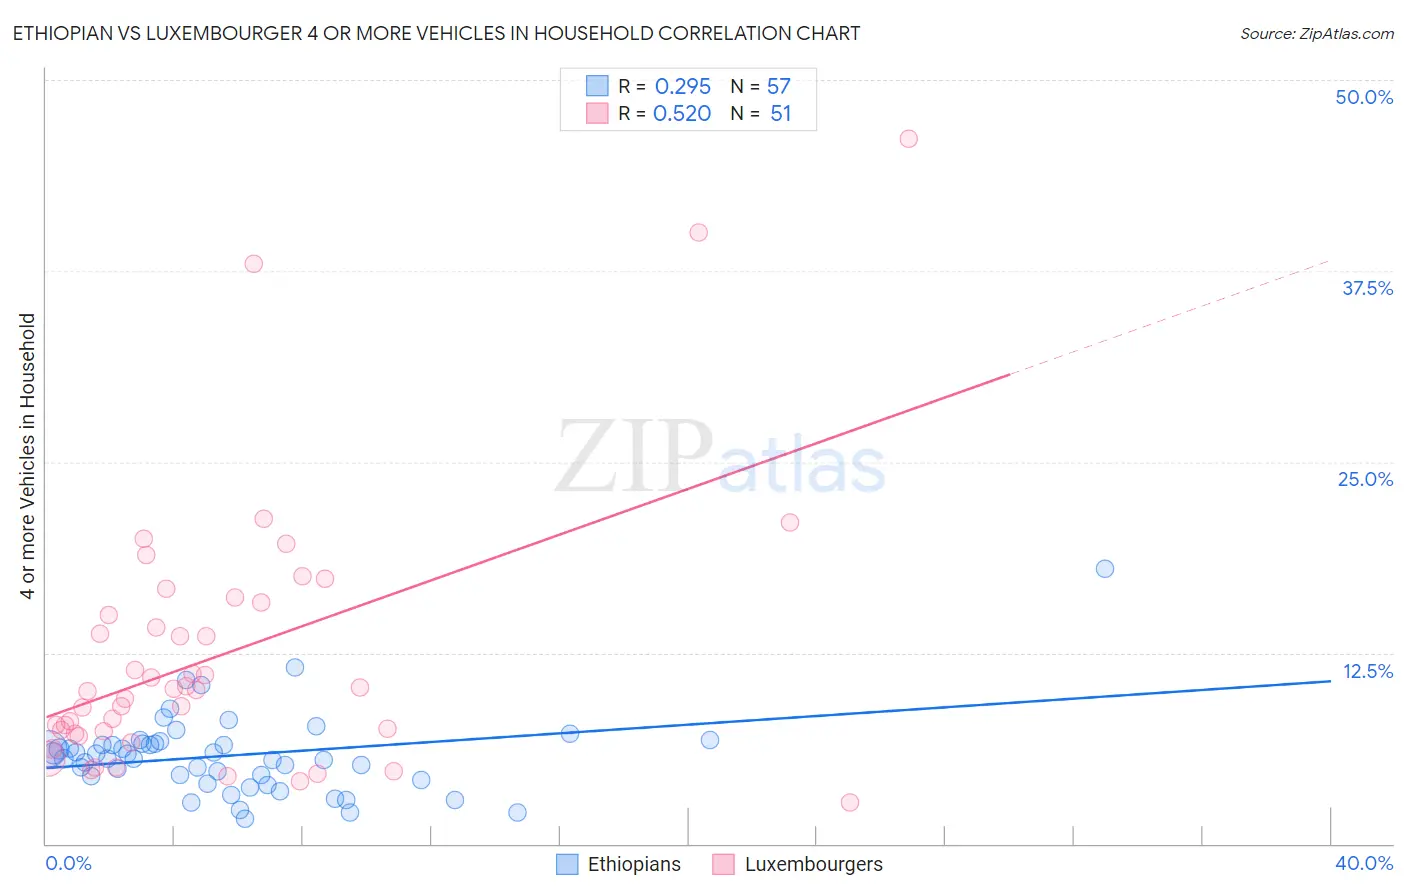 Ethiopian vs Luxembourger 4 or more Vehicles in Household